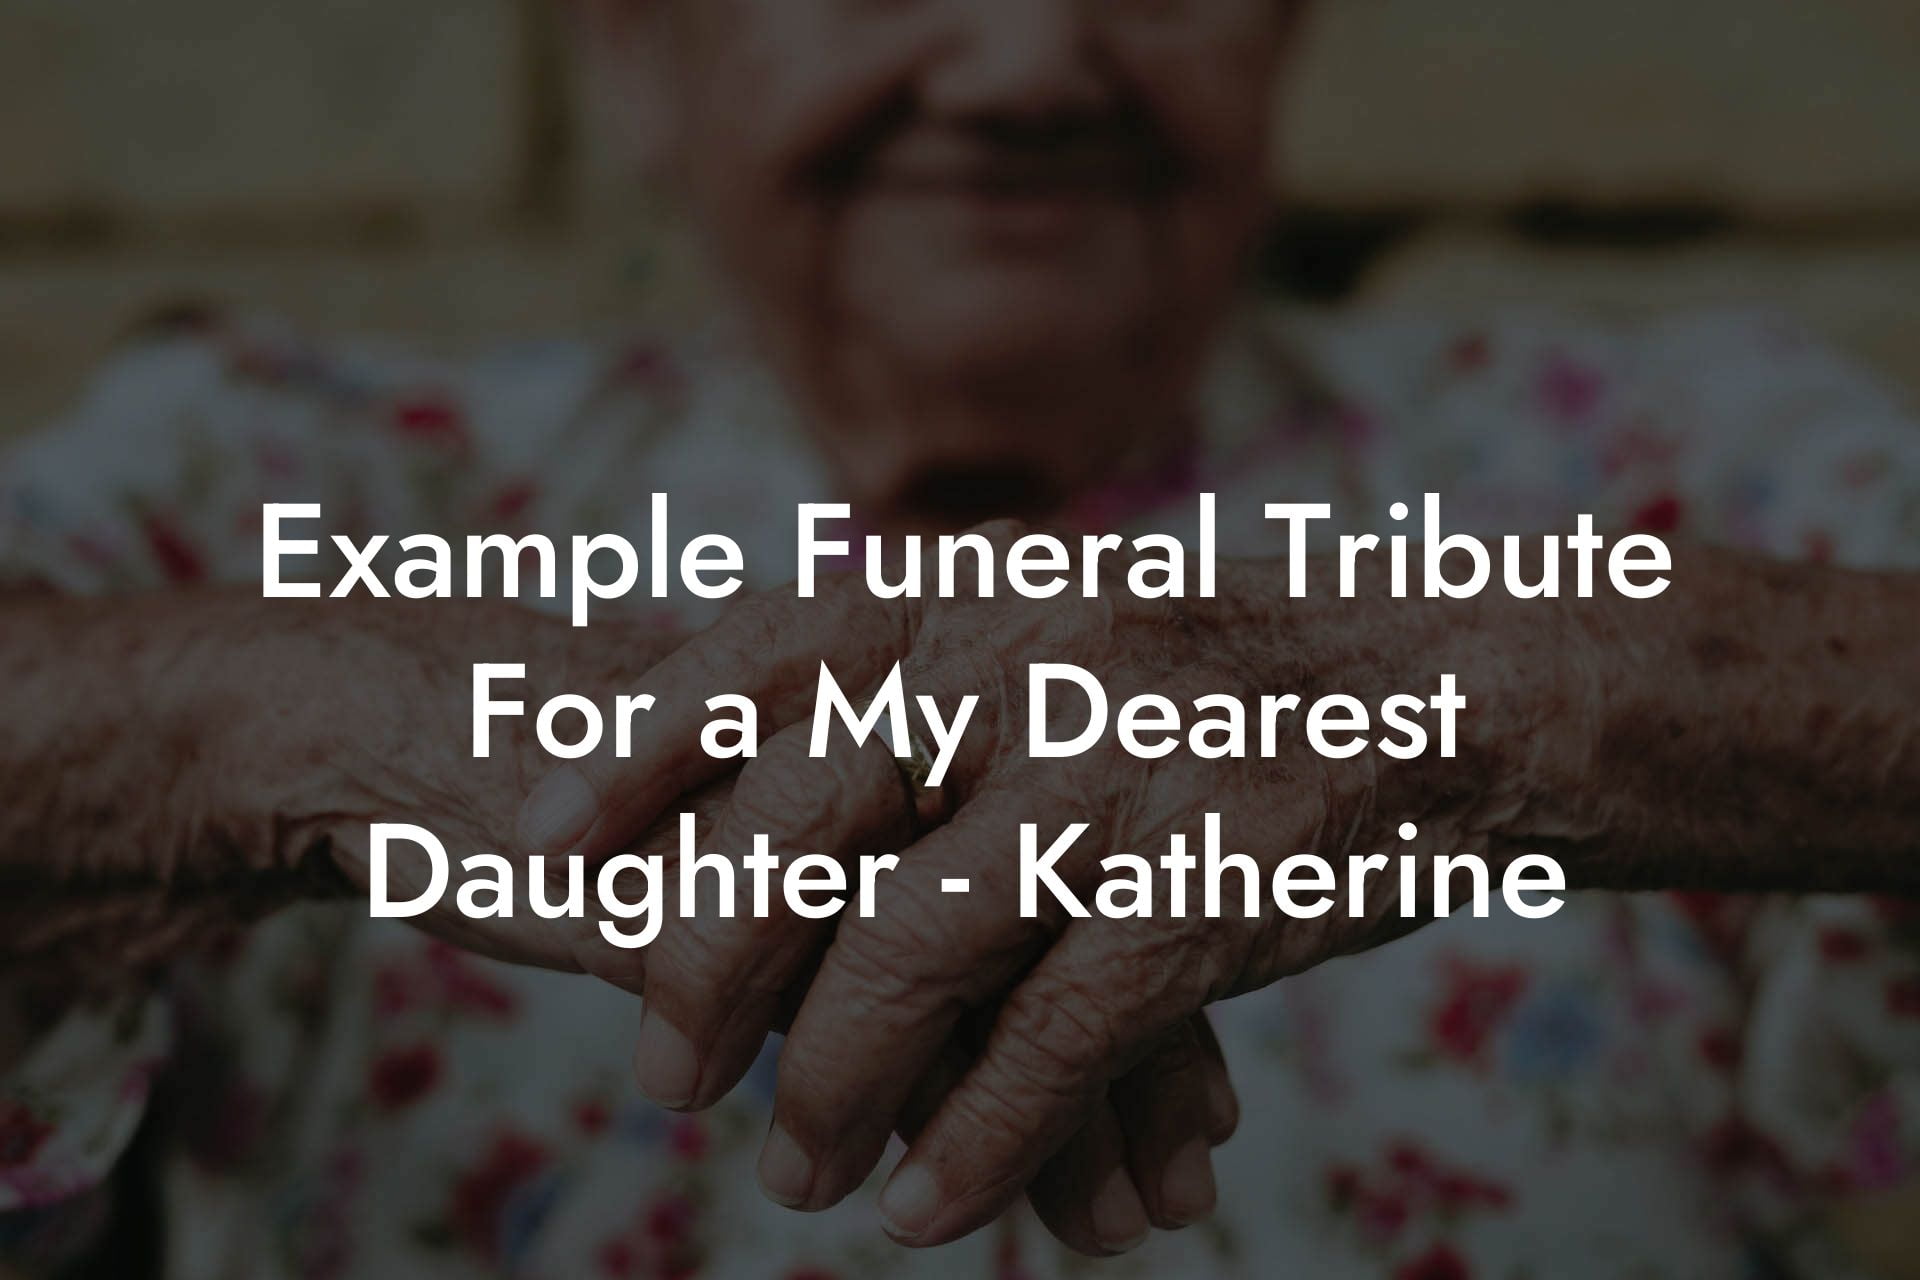 Example Funeral Tribute For a My Dearest Daughter - Katherine